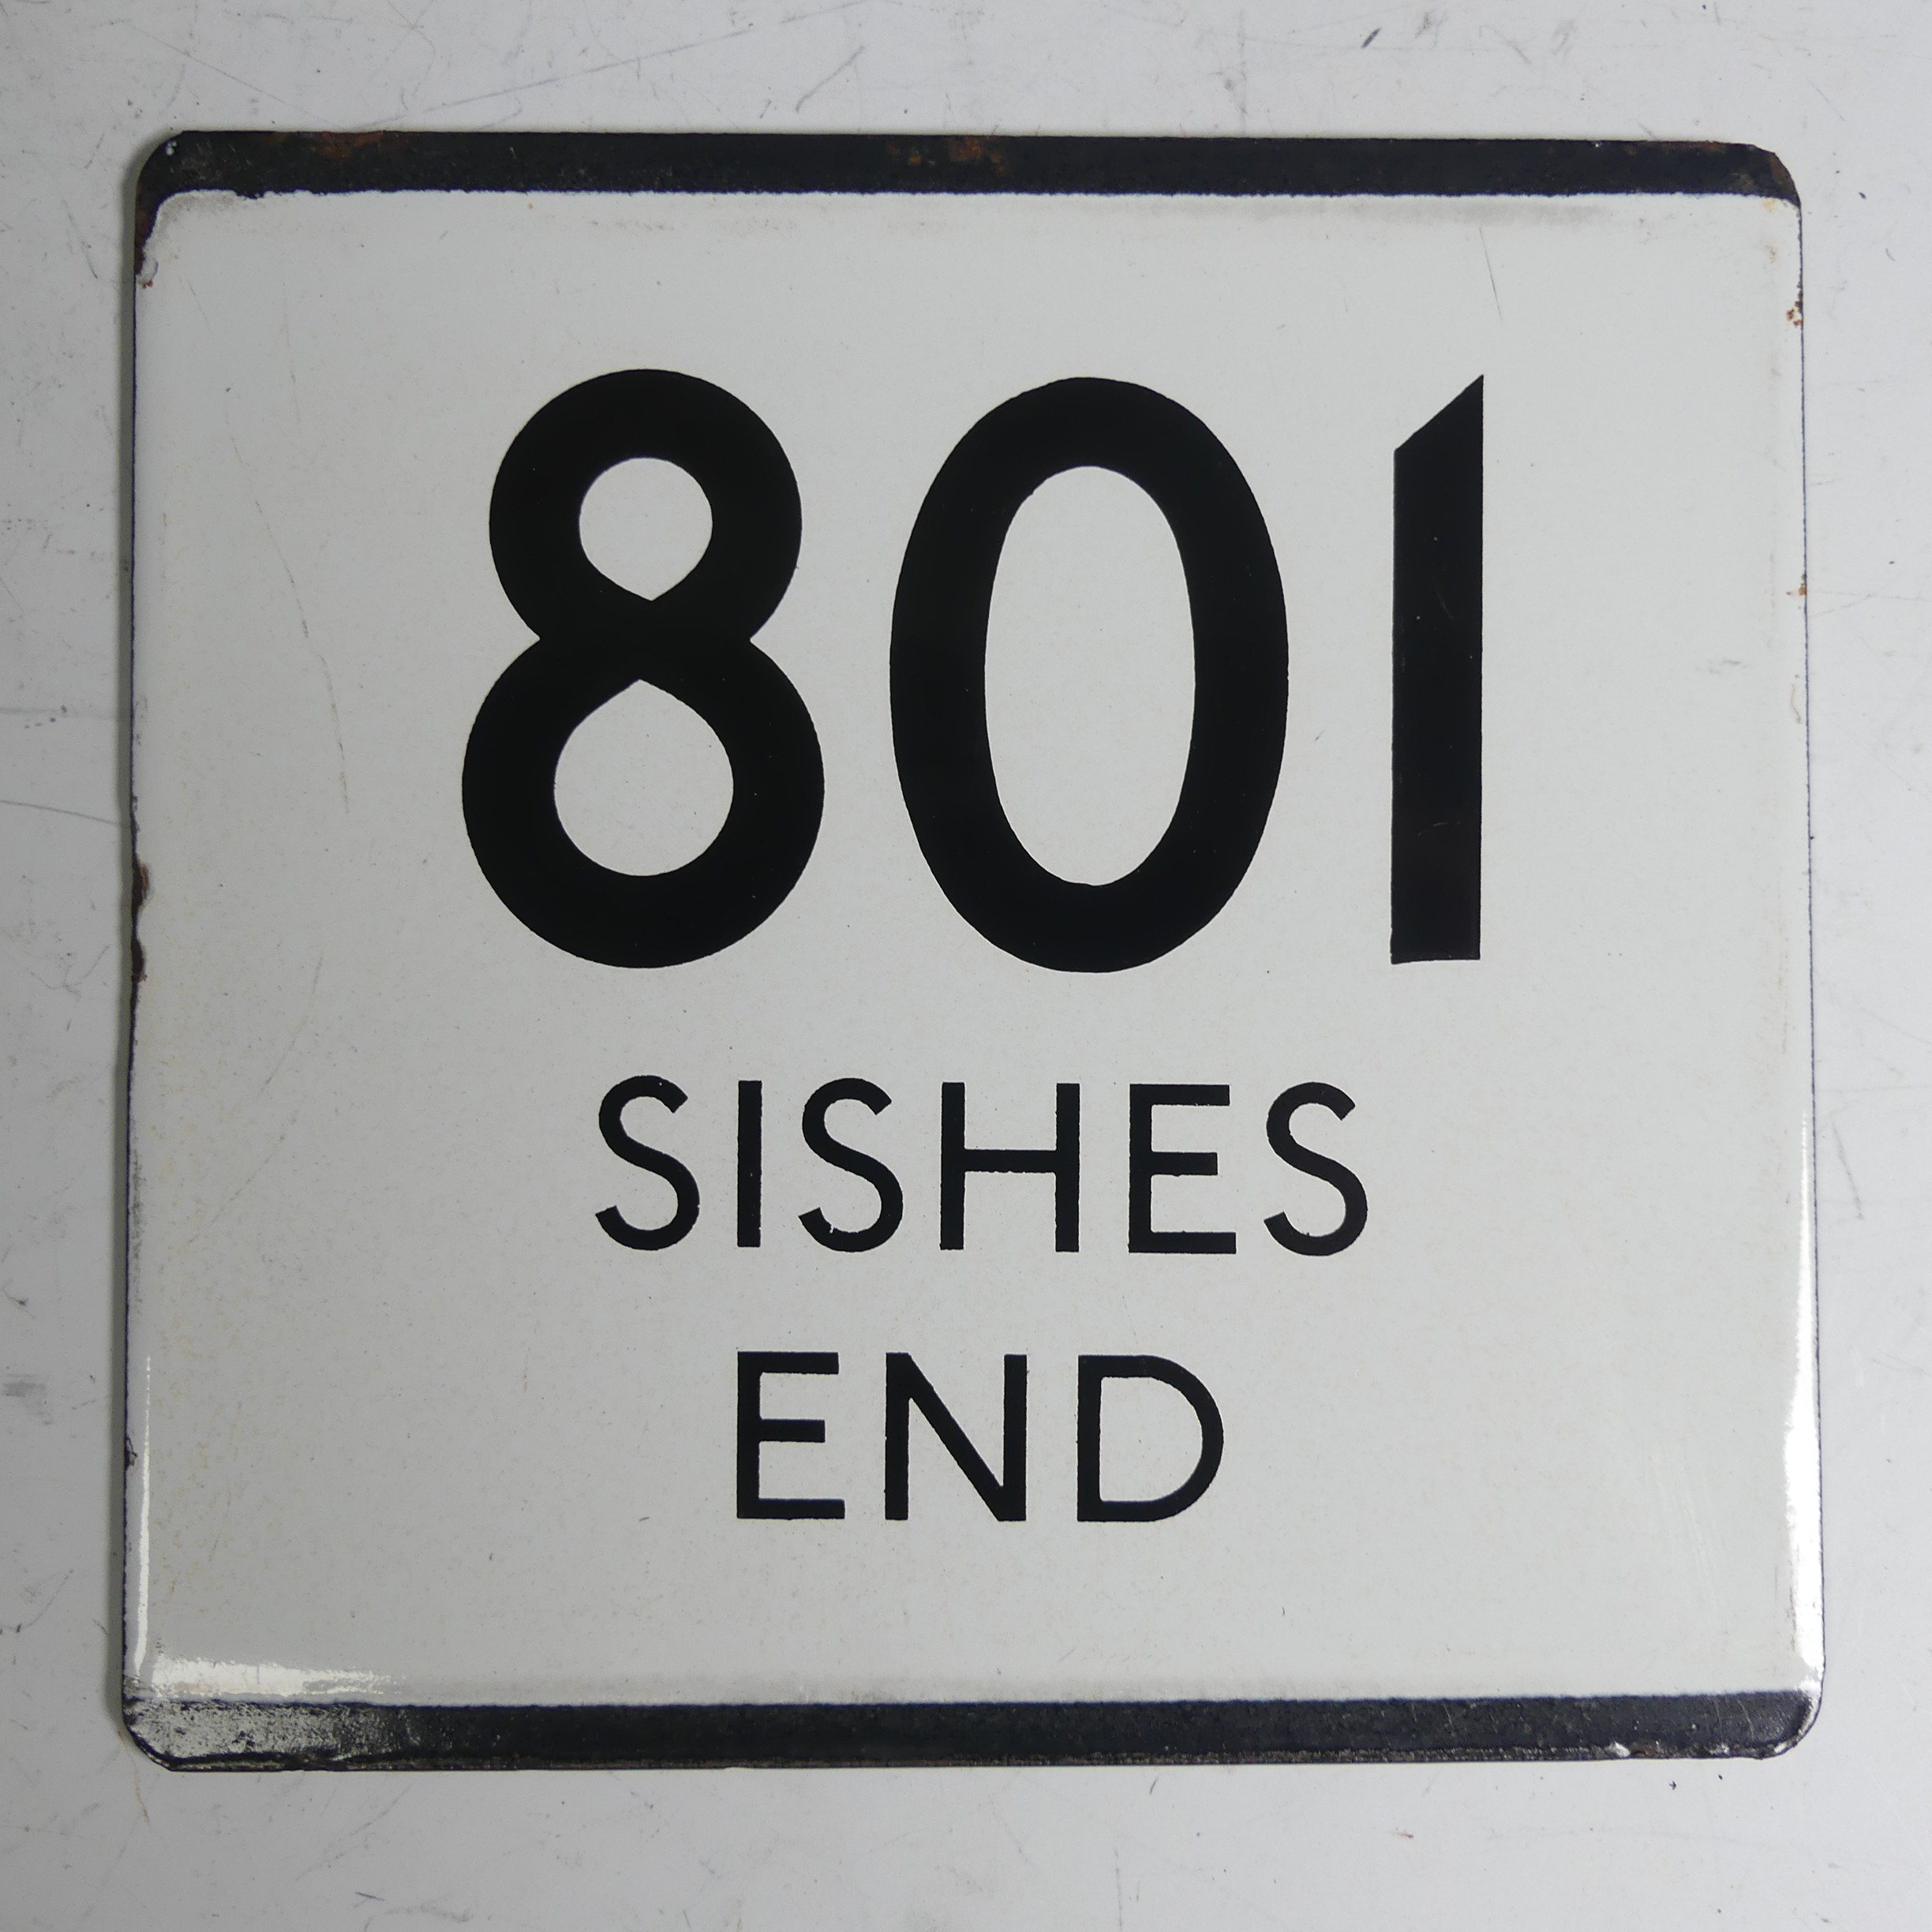 Bus and Coaching Memorabilia; A London Transport enamel Bus Stop E-Plate, Route No. 801 with